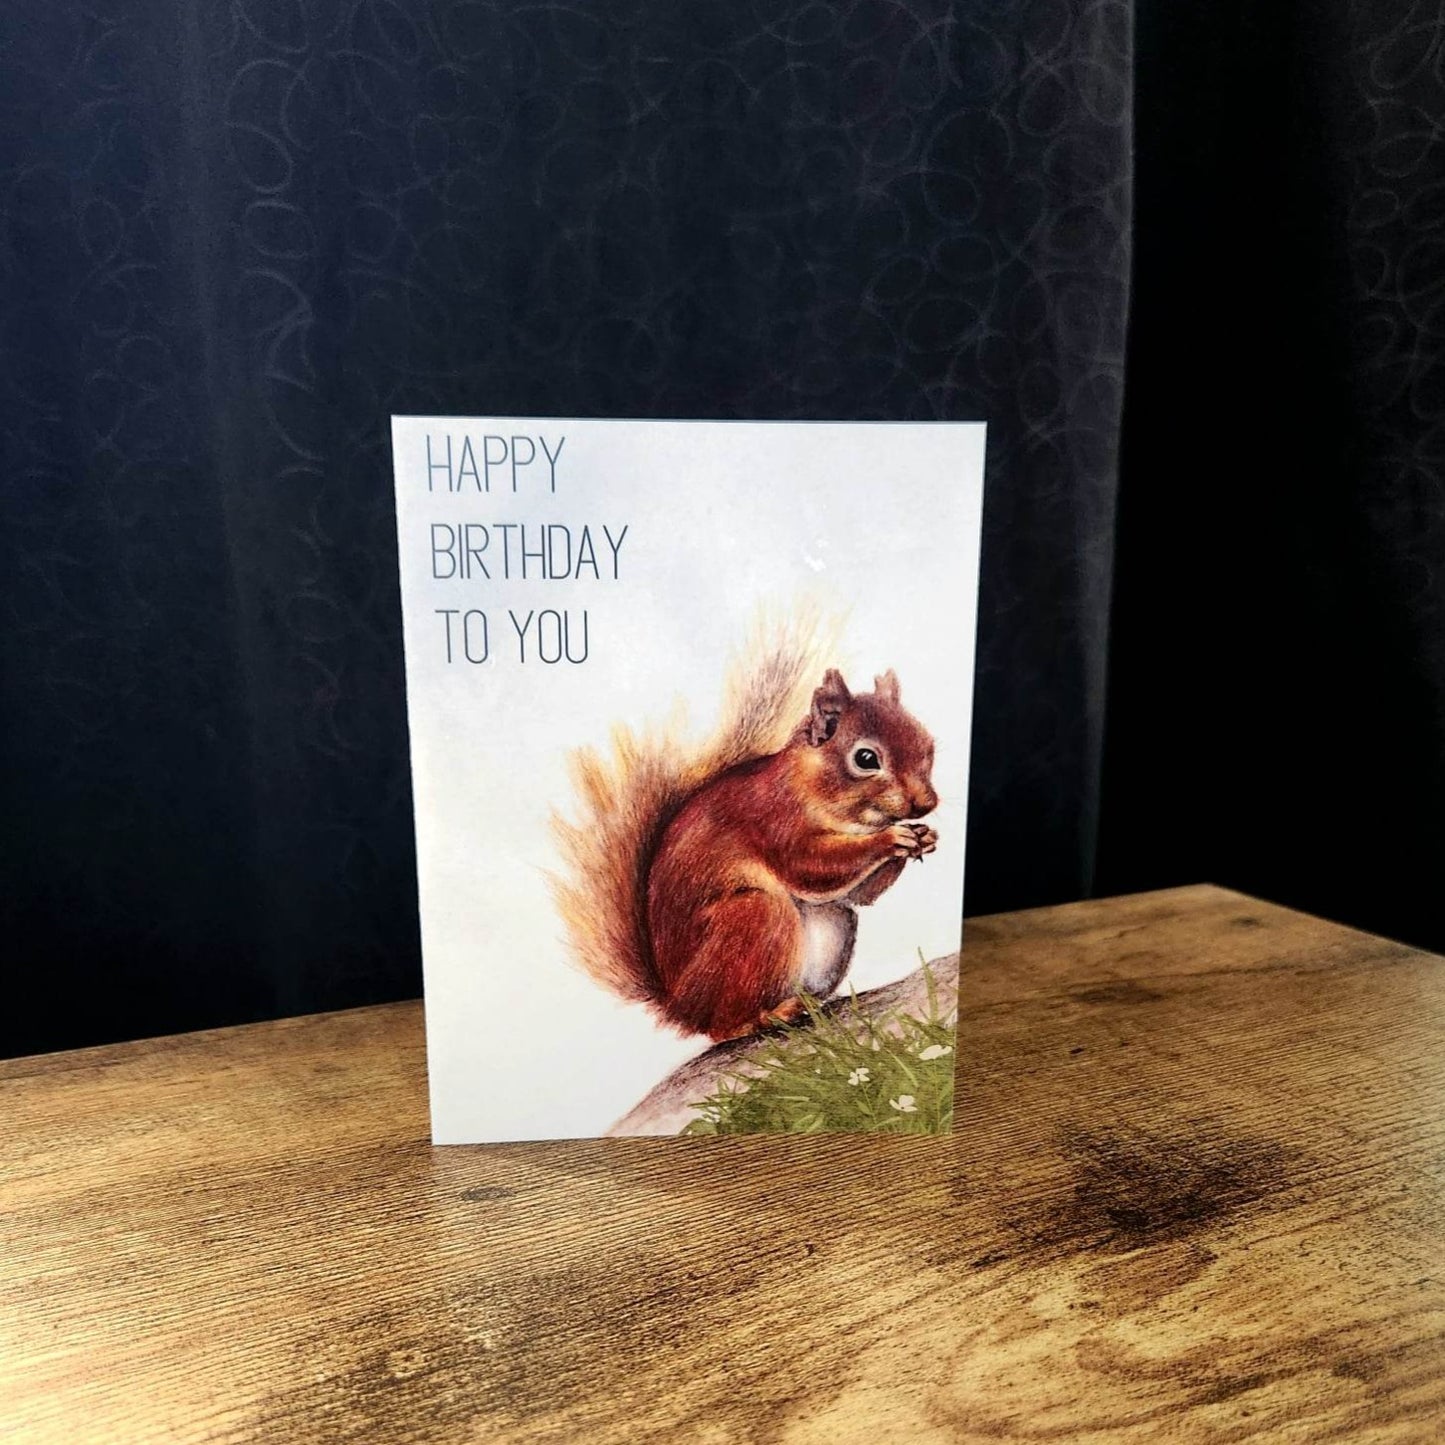 Happy birthday to you, Birthday card, Squirrel greeting card, Squirrel art card, Squirrel lover card, Nature card for husband, Wife, Partner